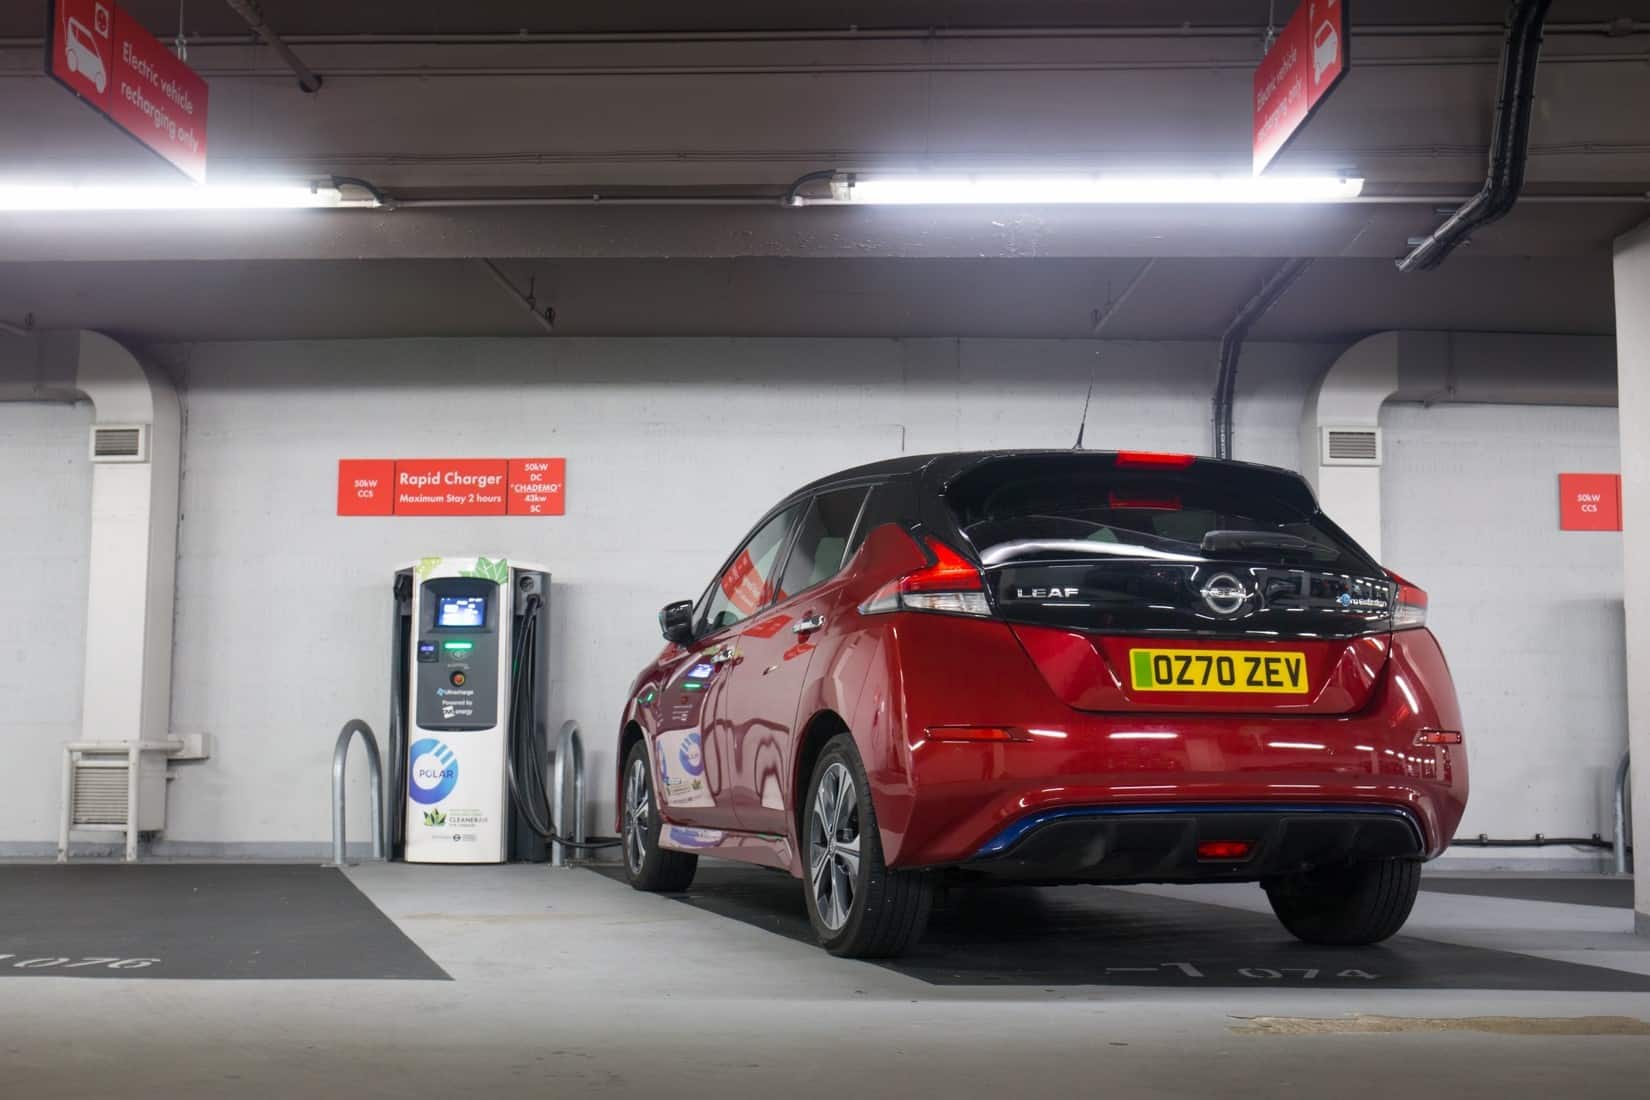 Electrifying your fleet? We look at three battery electric vehicles